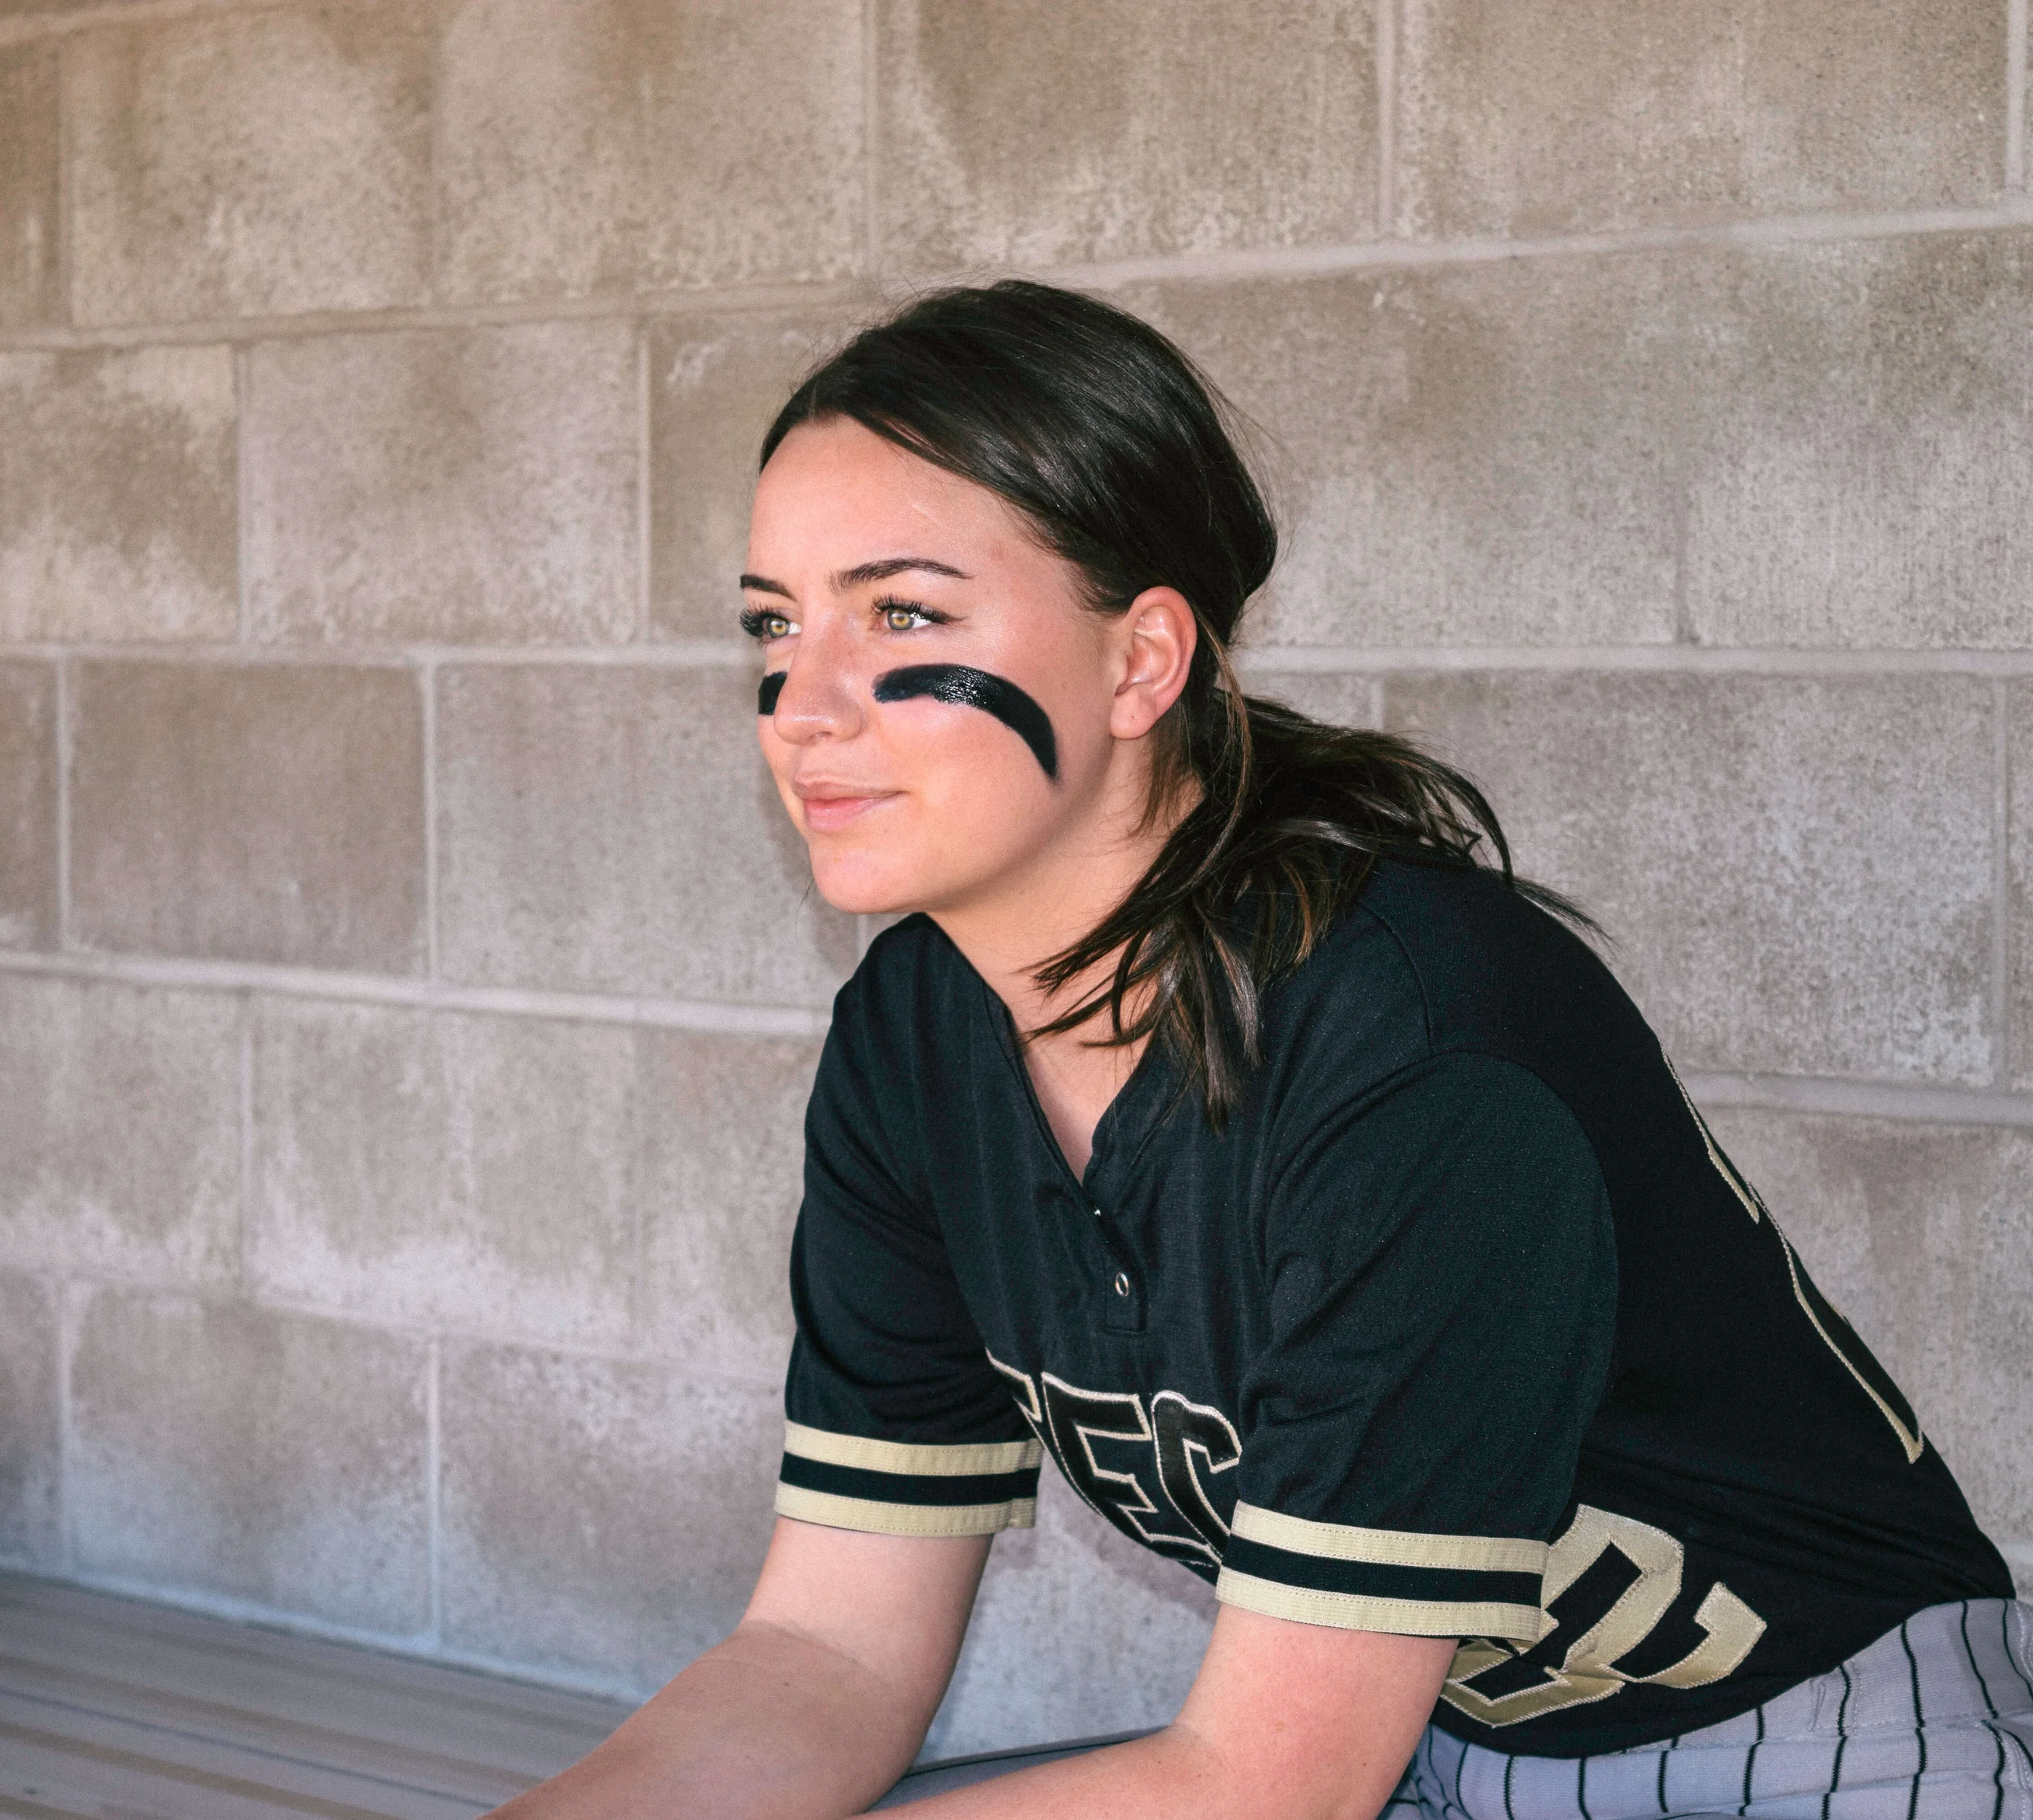 HOW TO GET THE BEST EYEBLACK 